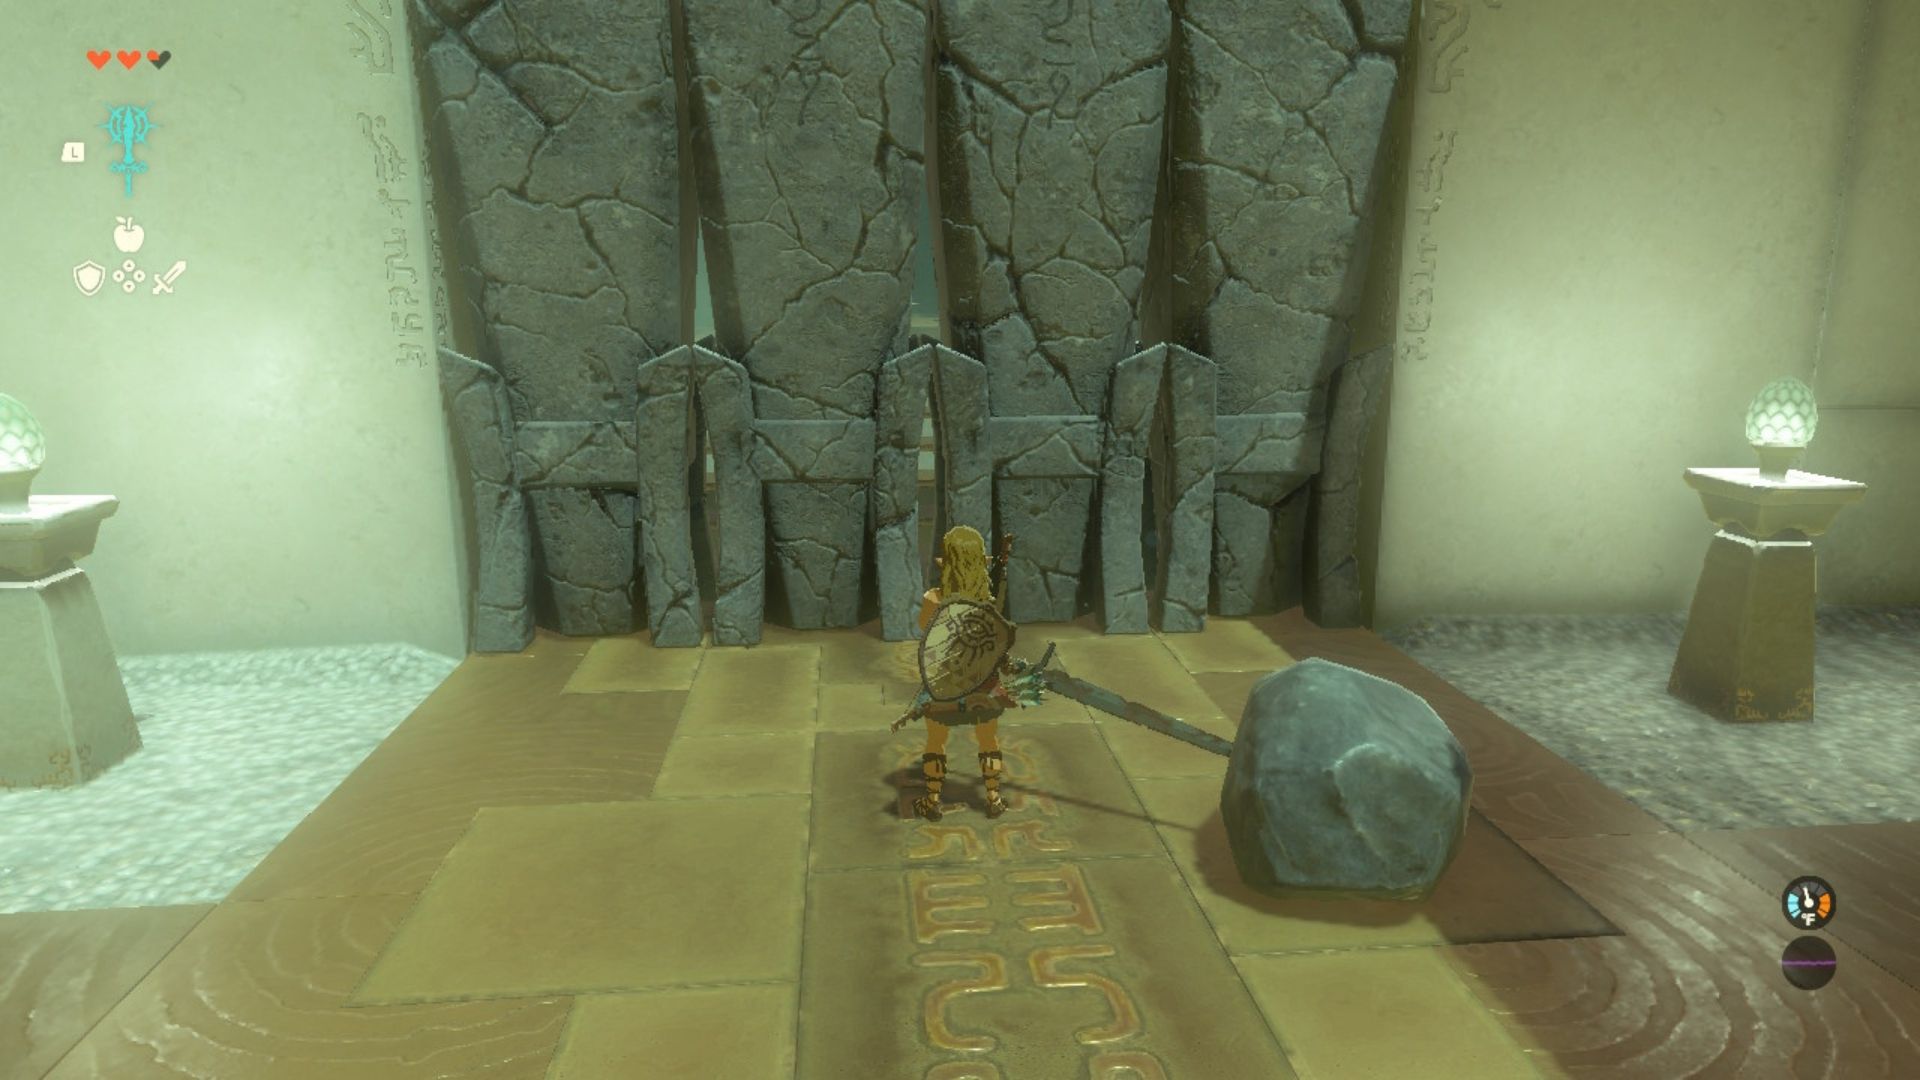 Link holding a fused sword and boulder weapon in front of a rock barrier